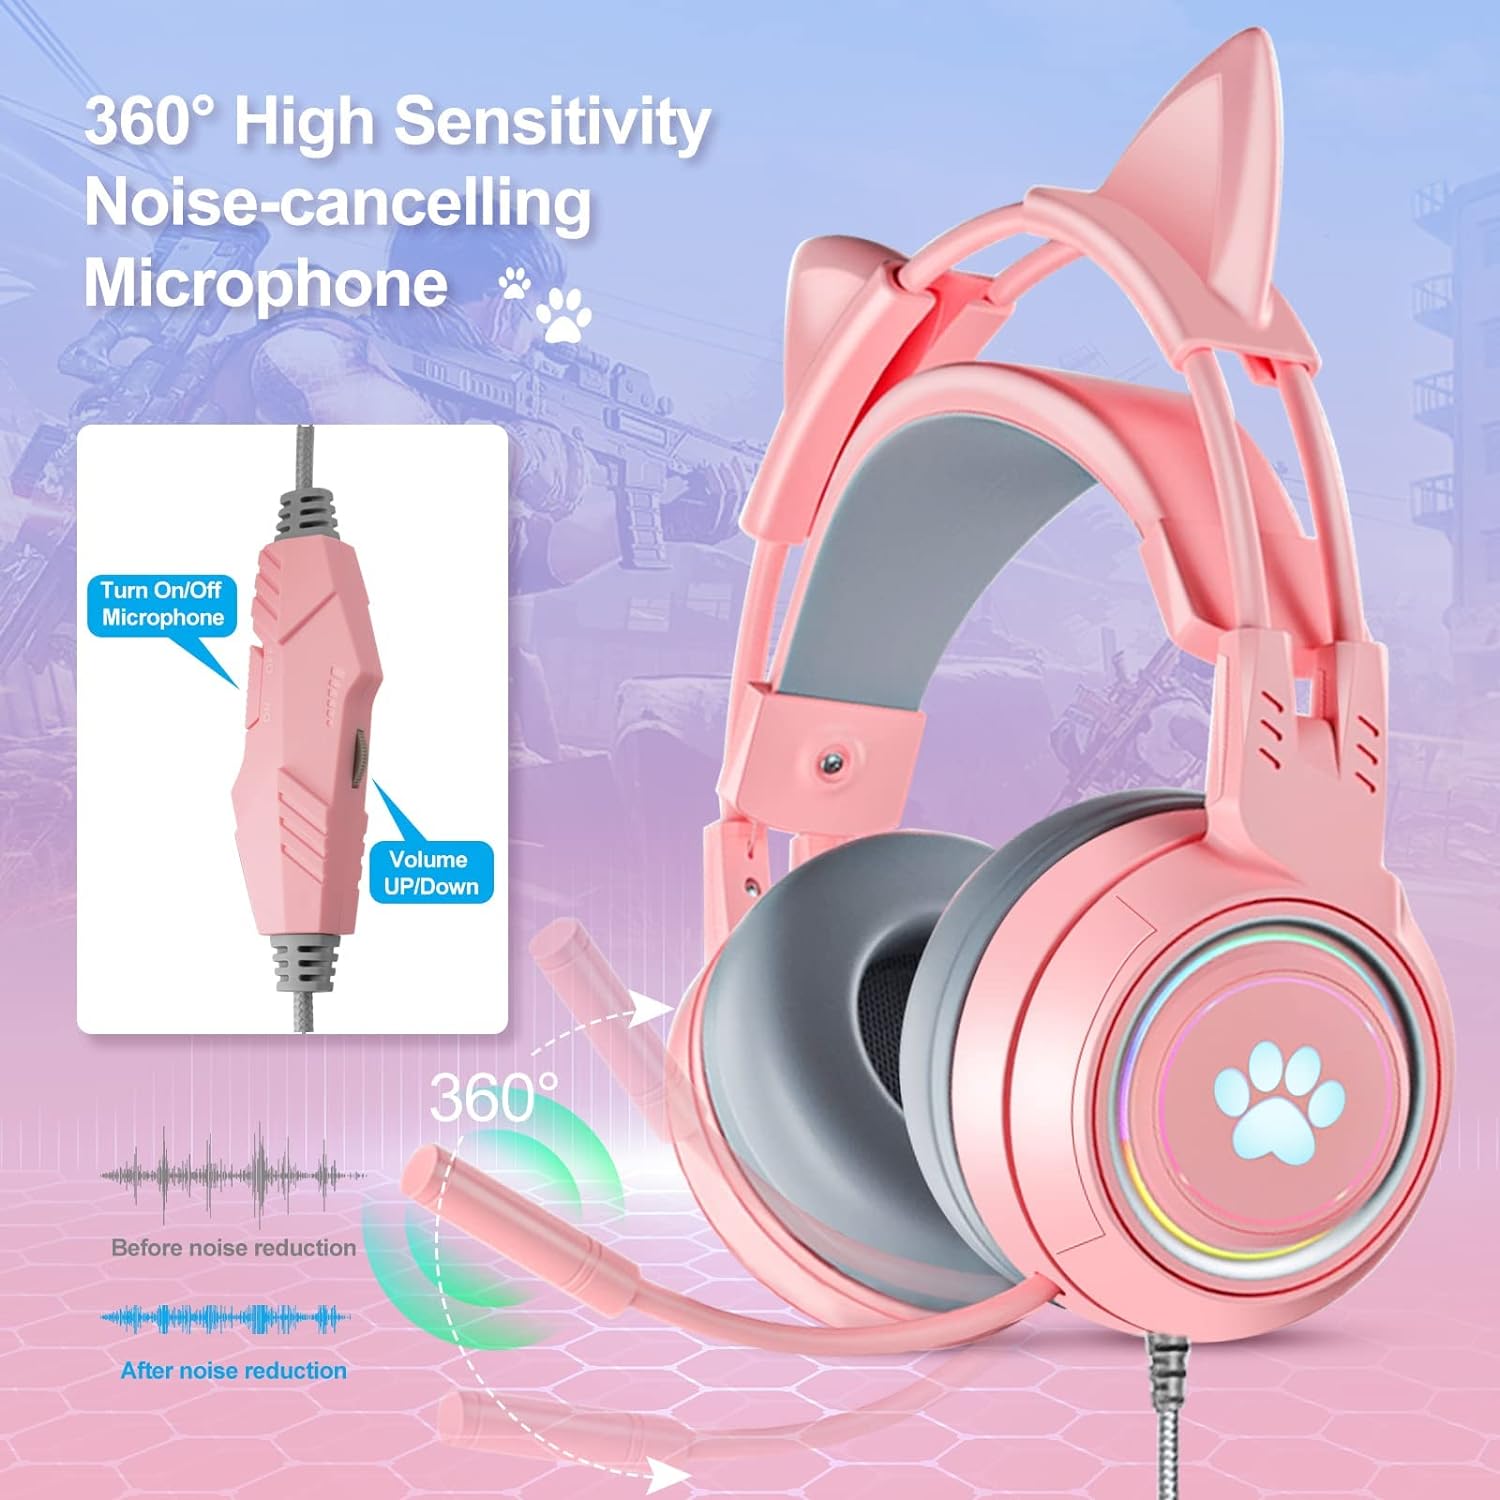 Bluetooth Wireless Headphones, Over Ear Headphones, Cat Ear Kids Gaming Headset with Microphone for Laptop/PC /PS4 /PS5 /Xbox/Nintendo Switch, RGB Light Up 3.5mm Wired USB Headset (Pink)